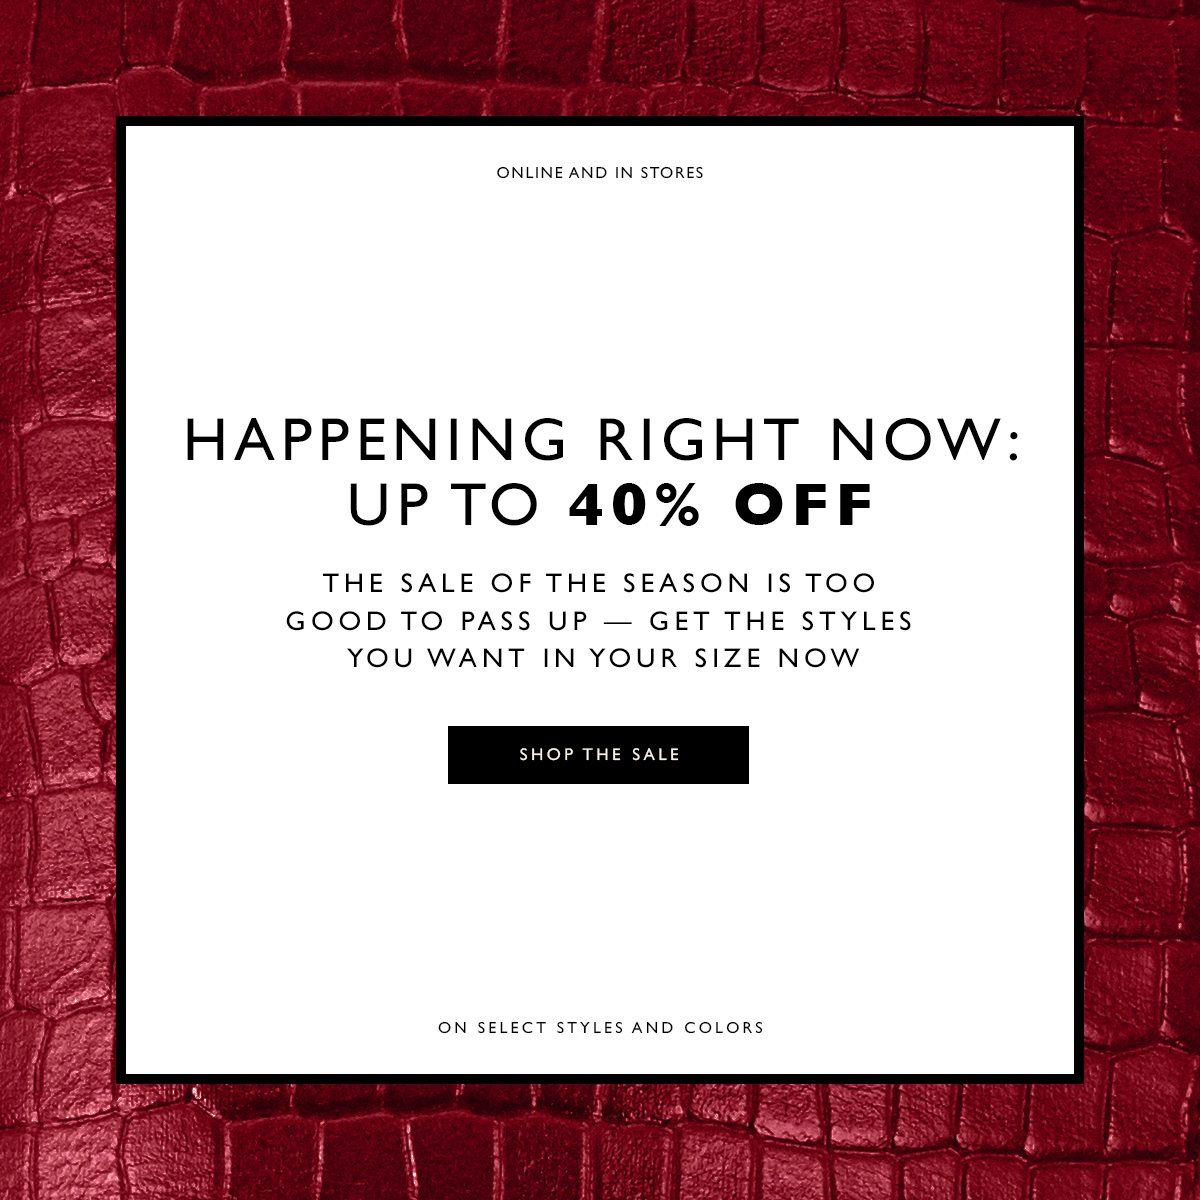 Online and In Stores. Happening Right Now: Up to 40% Off. The Sale of the Season is too good to pass up — get the styles you want in your size now. SHOP THE SALE Disclaimer: On select styles and colors